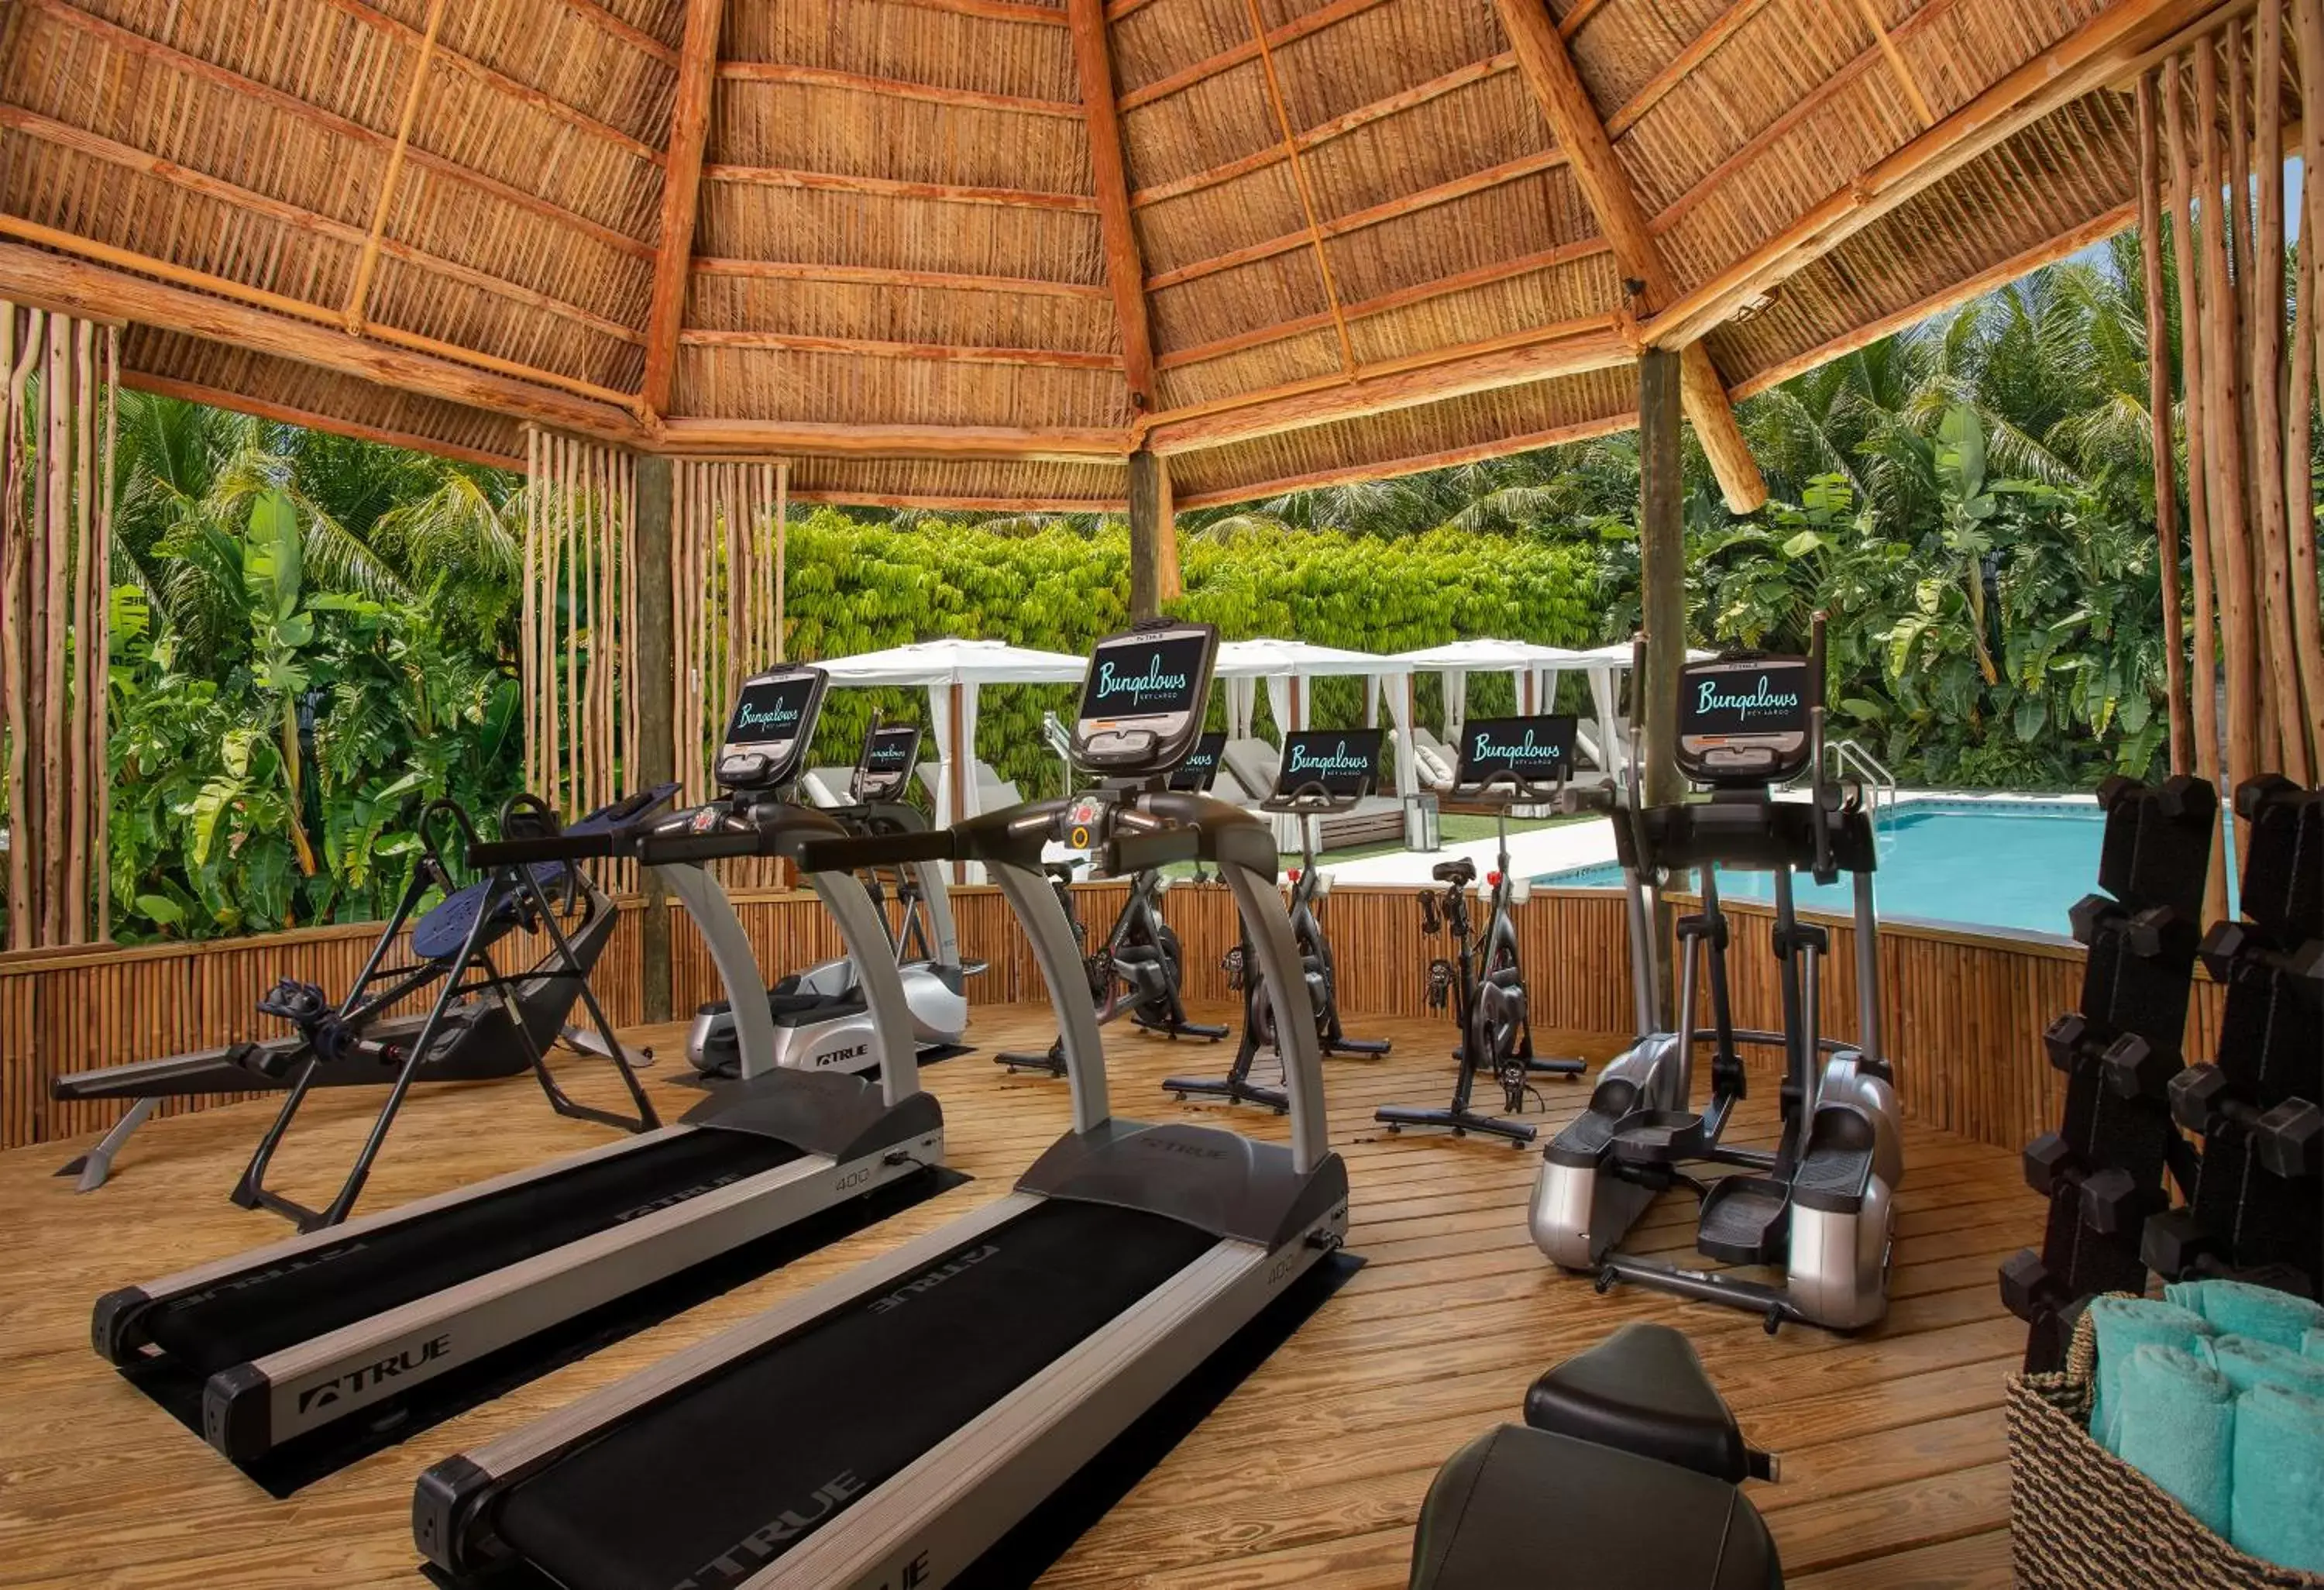 Fitness centre/facilities in Bungalows Key Largo - All Inclusive